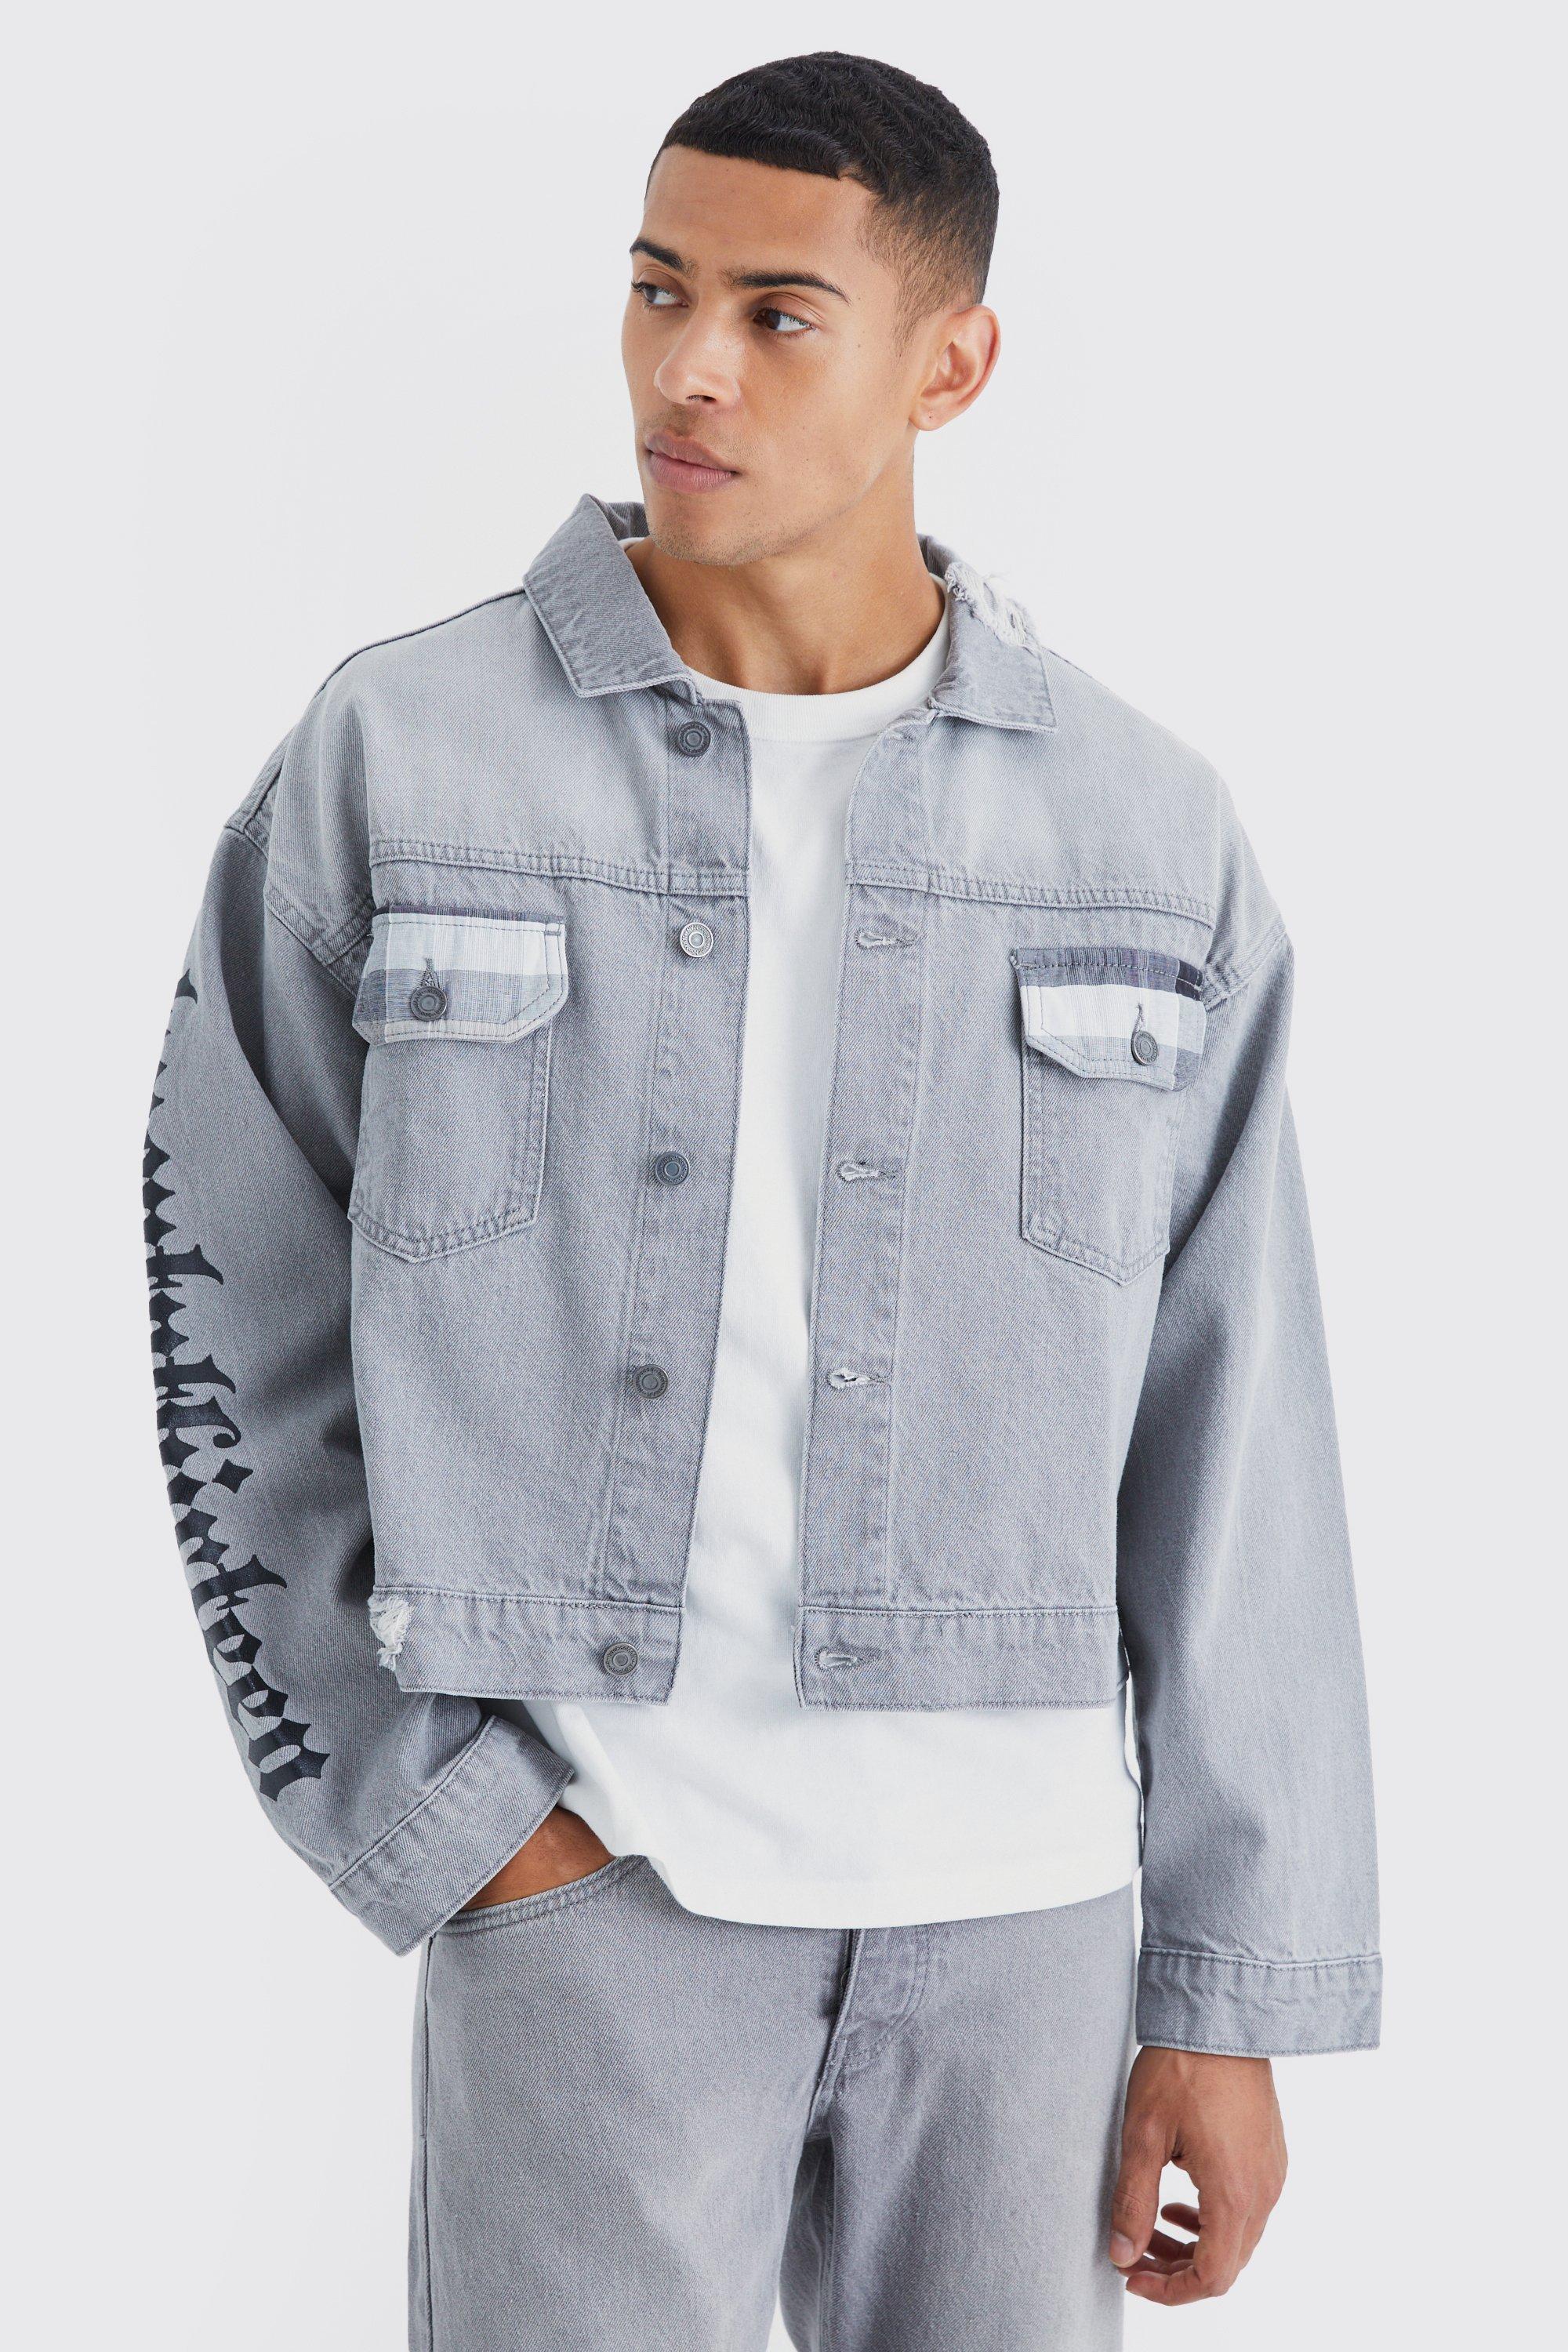 Grey Boxy Fit Back Graphic Jean Jackets